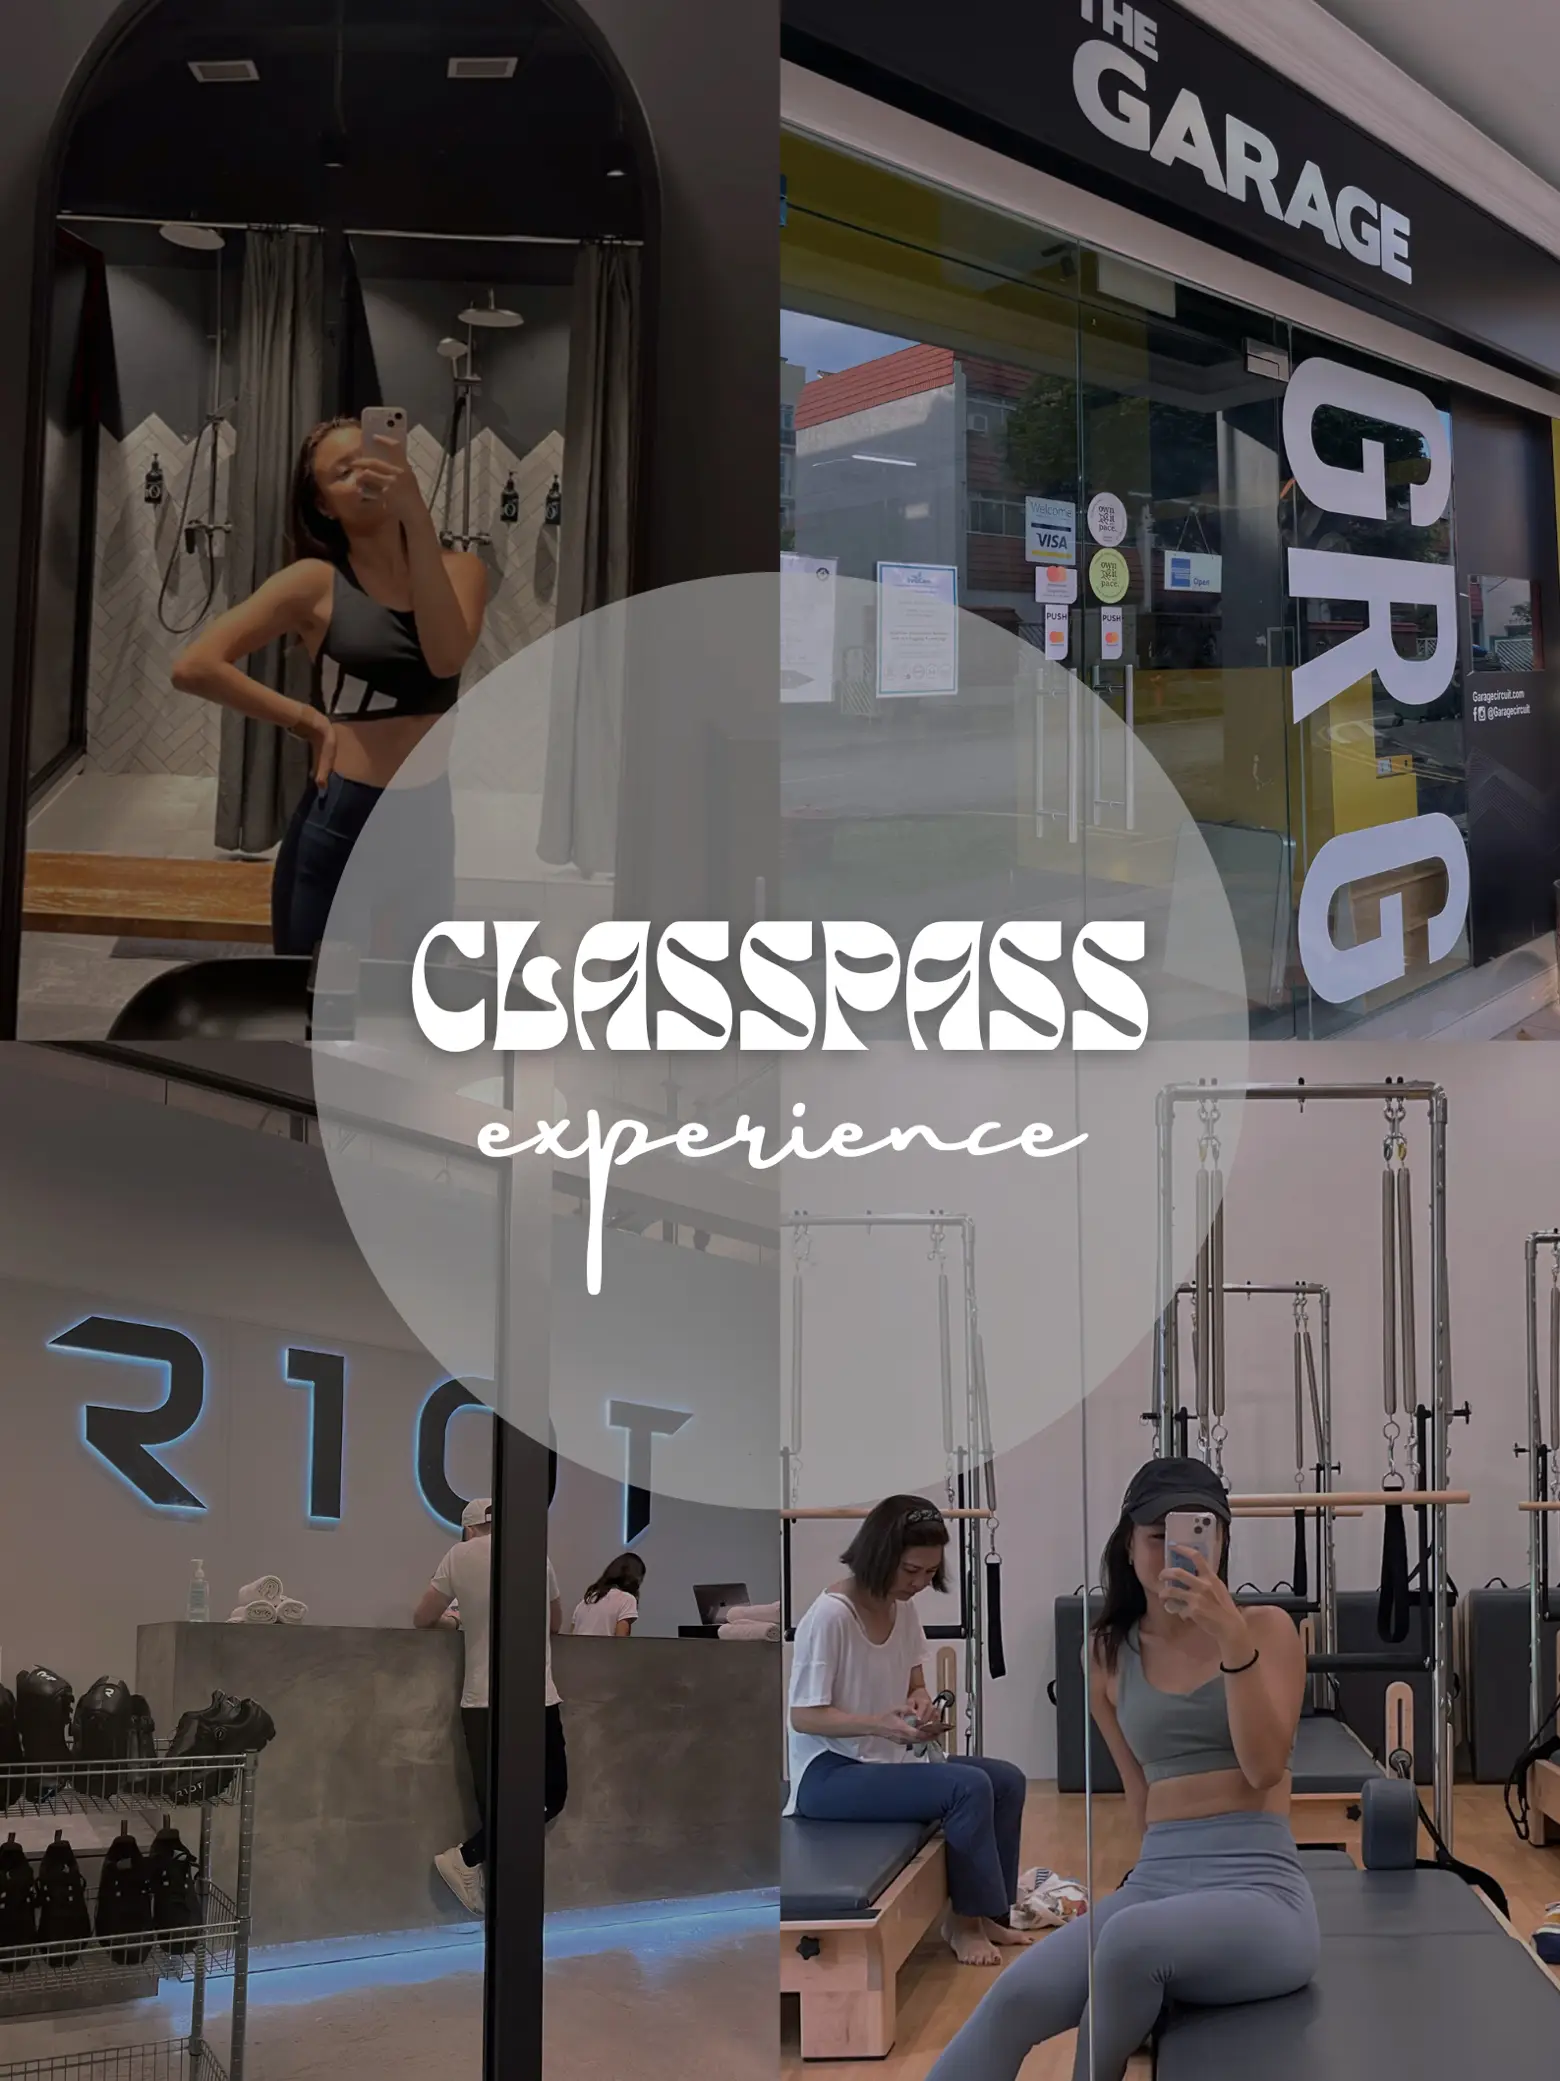 5 Things I Learnt About Fitness After Trying The New R10T Gym in Singapore